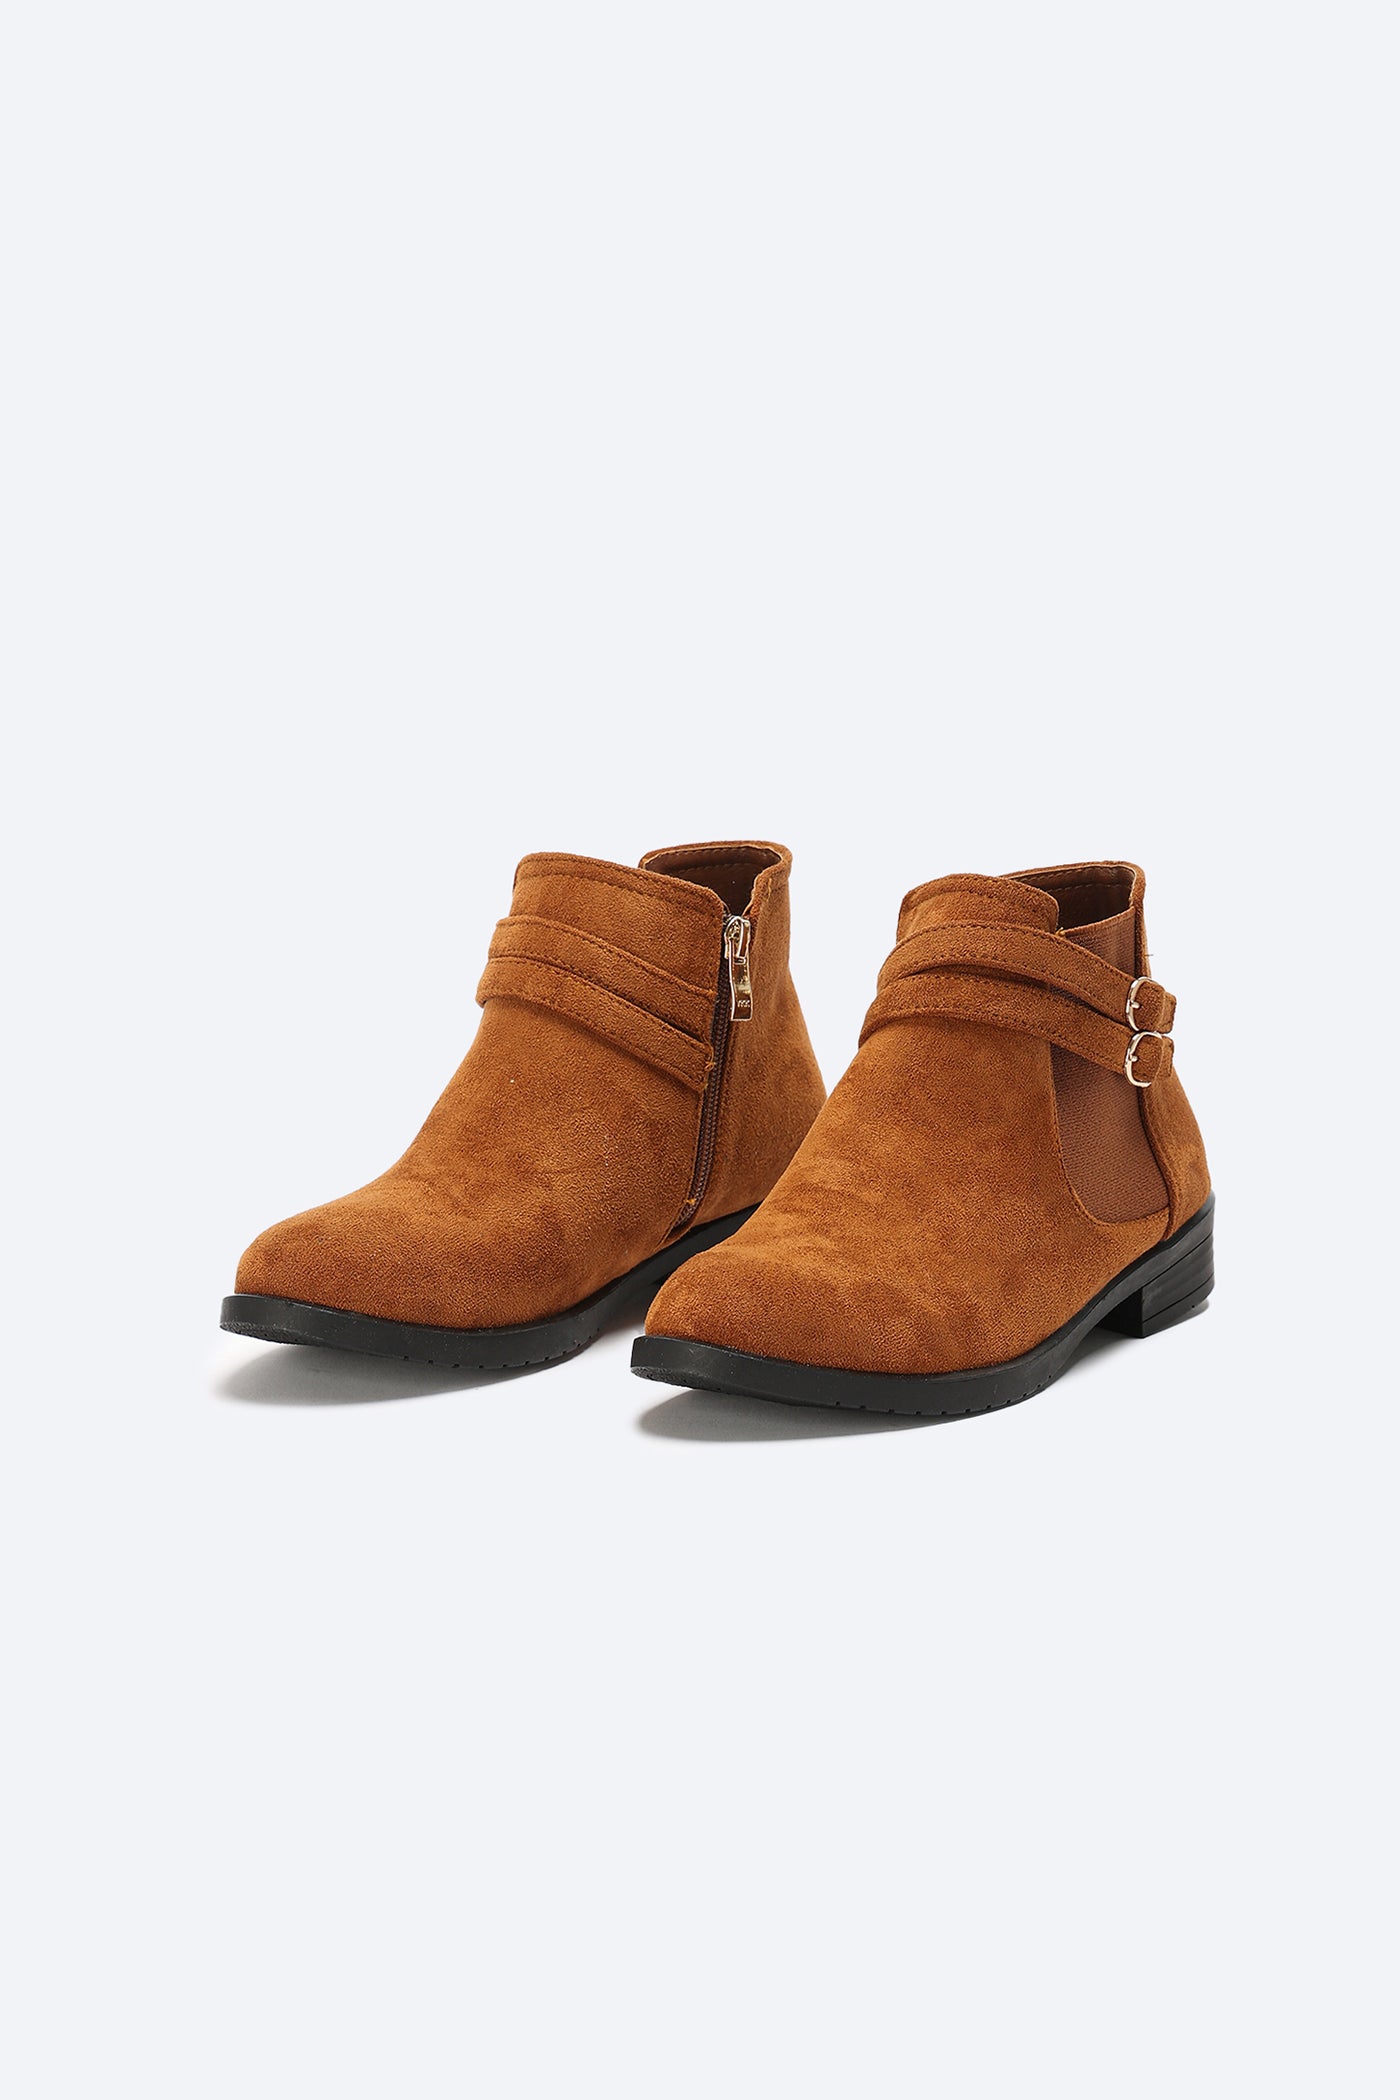 Ankle Boots - Double Buckle Straps - Brown